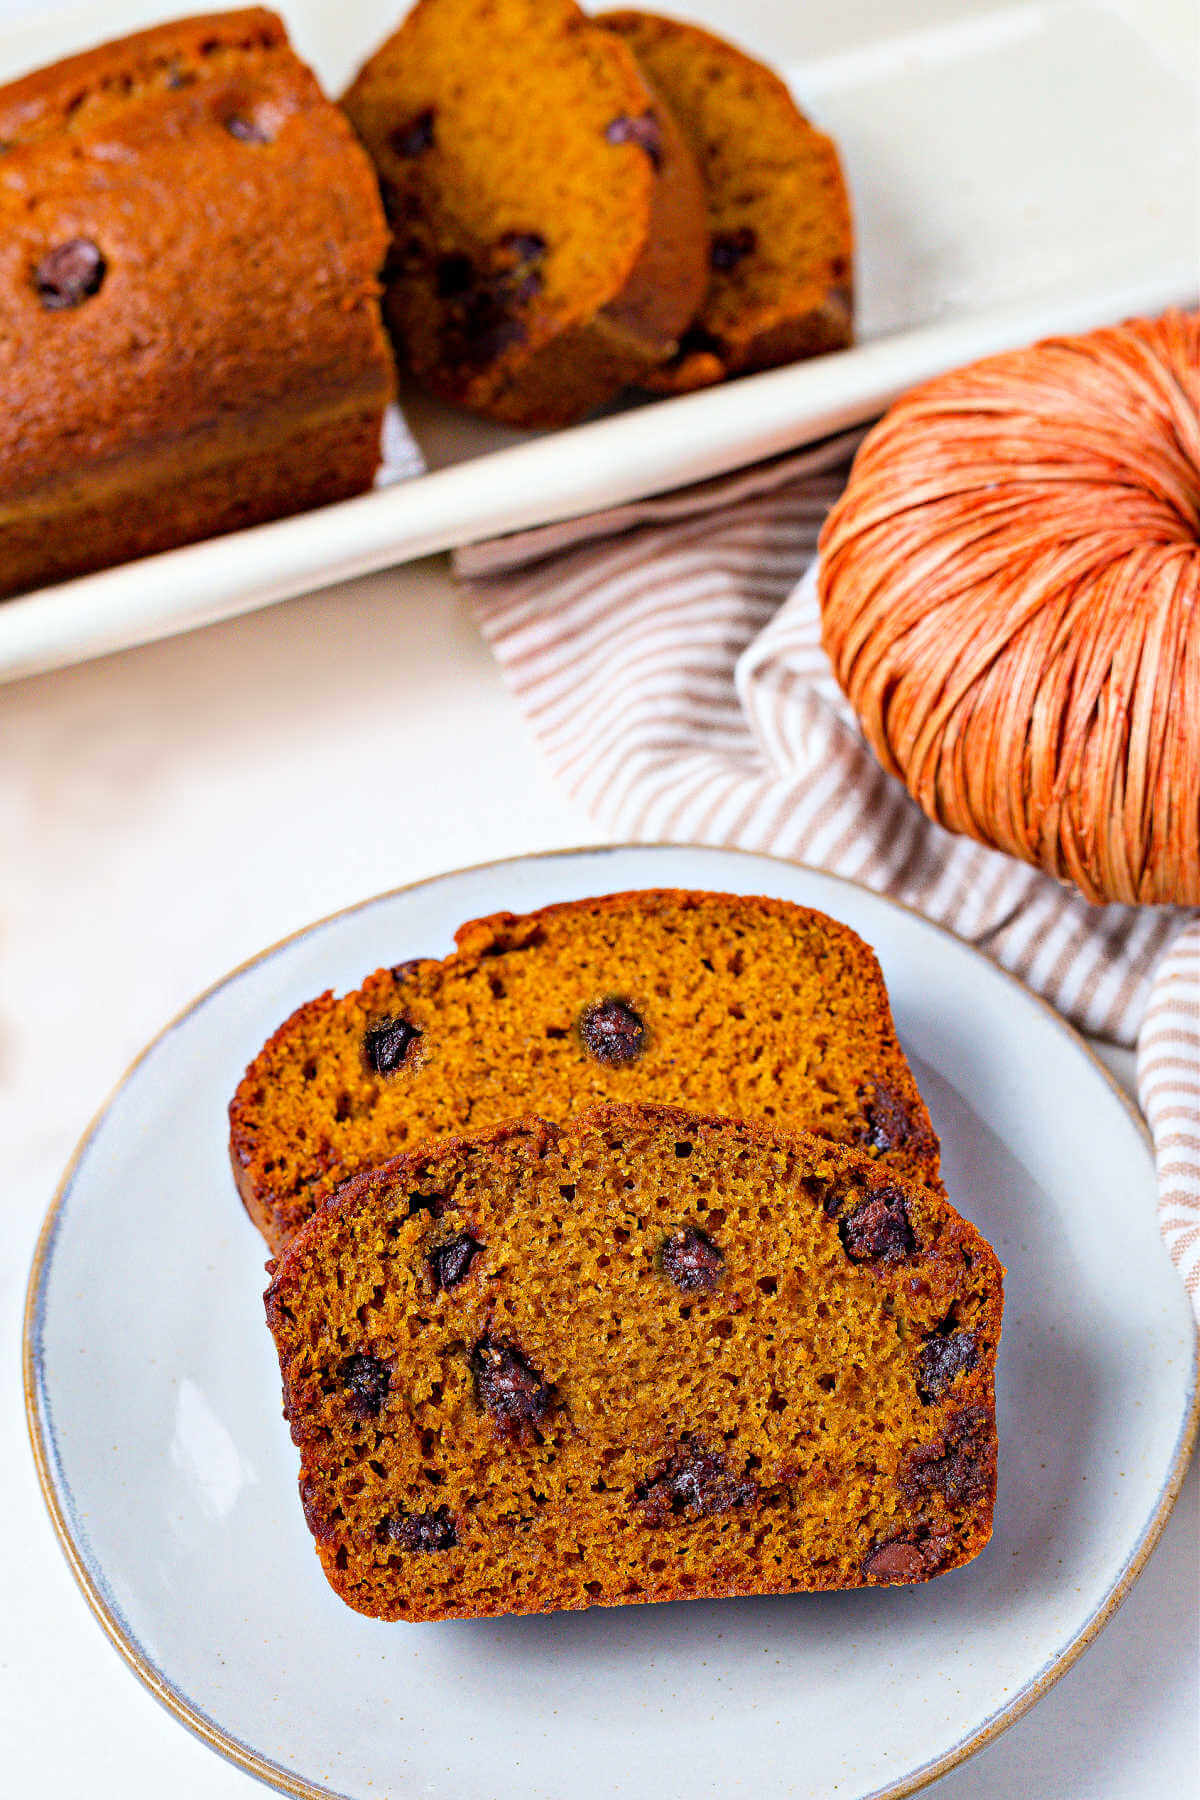 two slices of pumpkin bread with chocolate chips on a plate with the remaining loaf in the background.